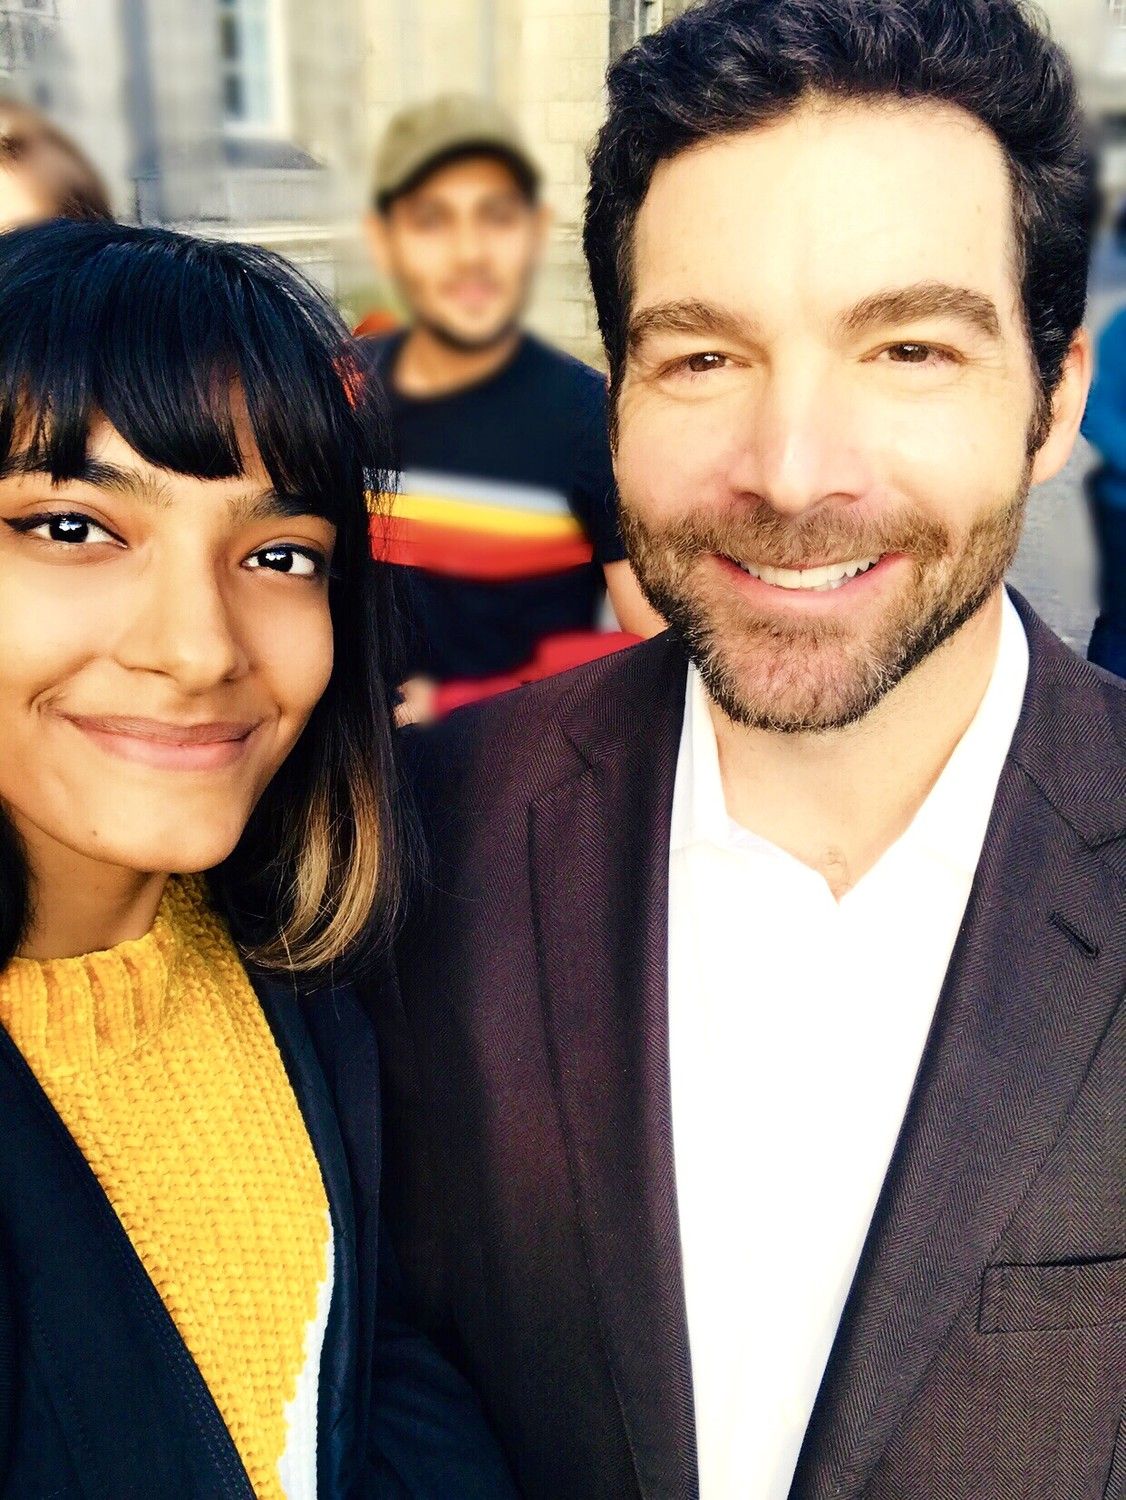 With the CEO of LinkedIn, Jeff Weiner.